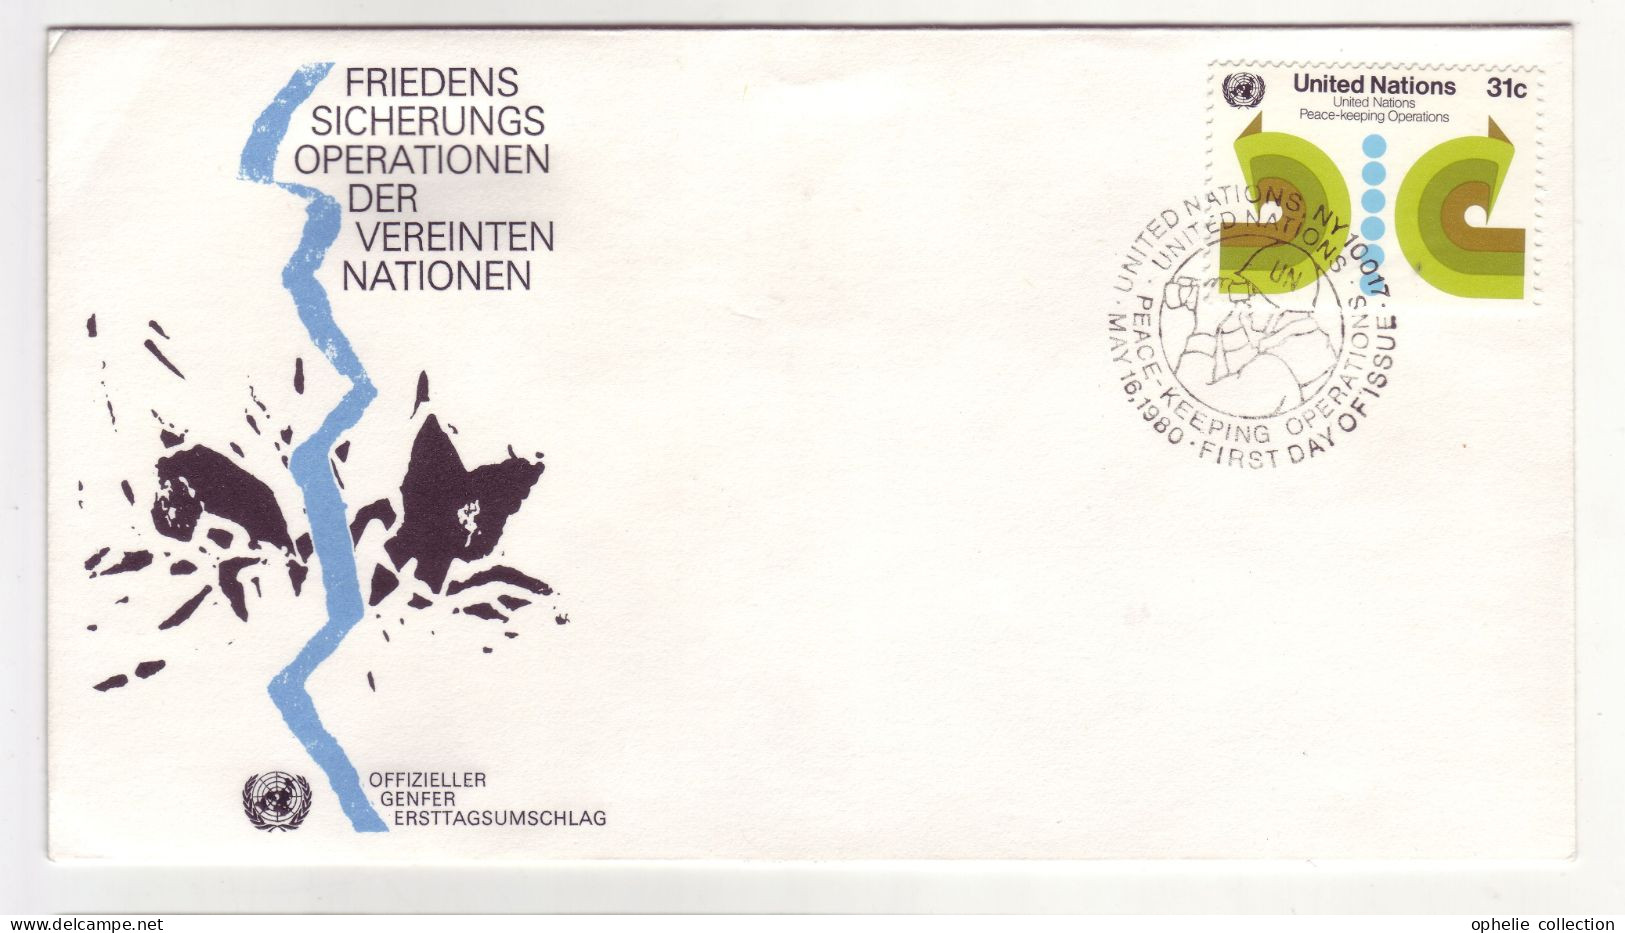 Nations Unies - Vienne FDC - 16/05/1980 - Peace Keeping Operations - M324 - Used Stamps